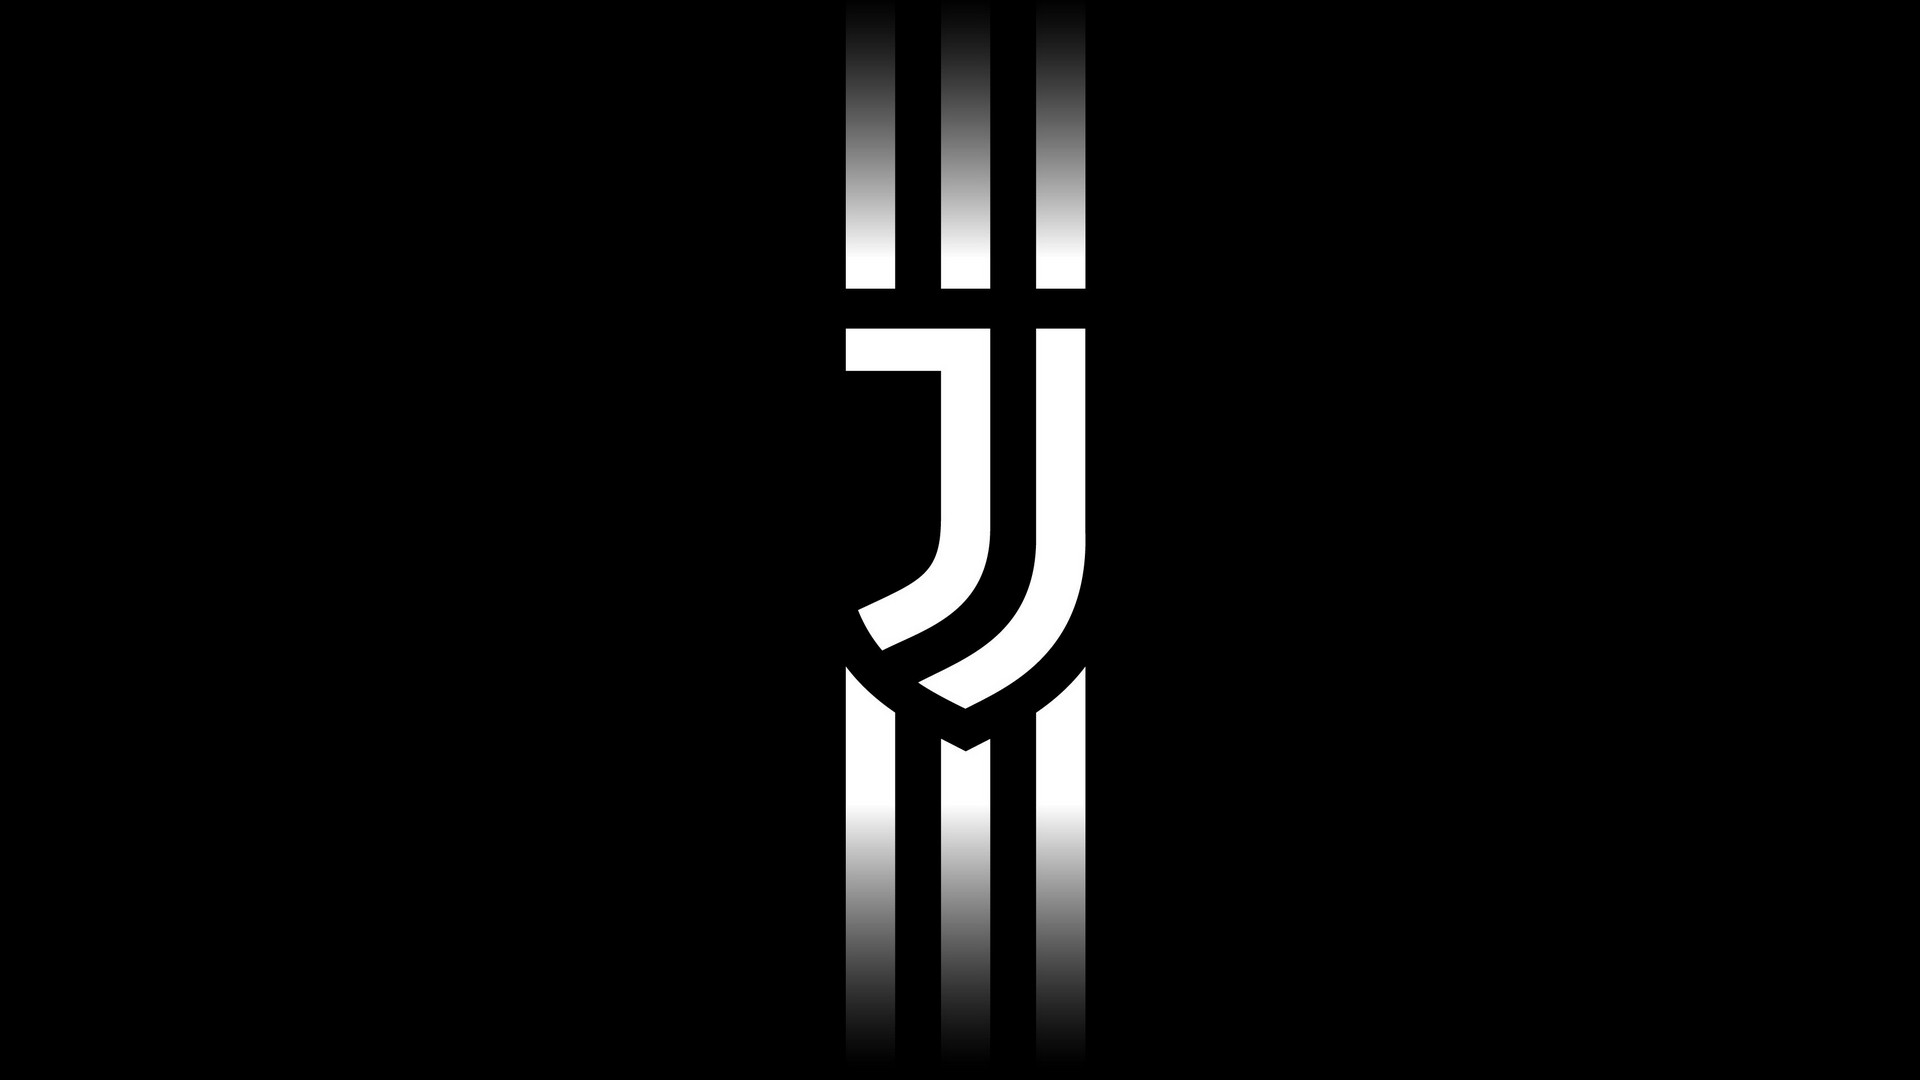 HD Juventus Soccer Backgrounds with resolution 1920x1080 pixel. You can make this wallpaper for your Mac or Windows Desktop Background, iPhone, Android or Tablet and another Smartphone device